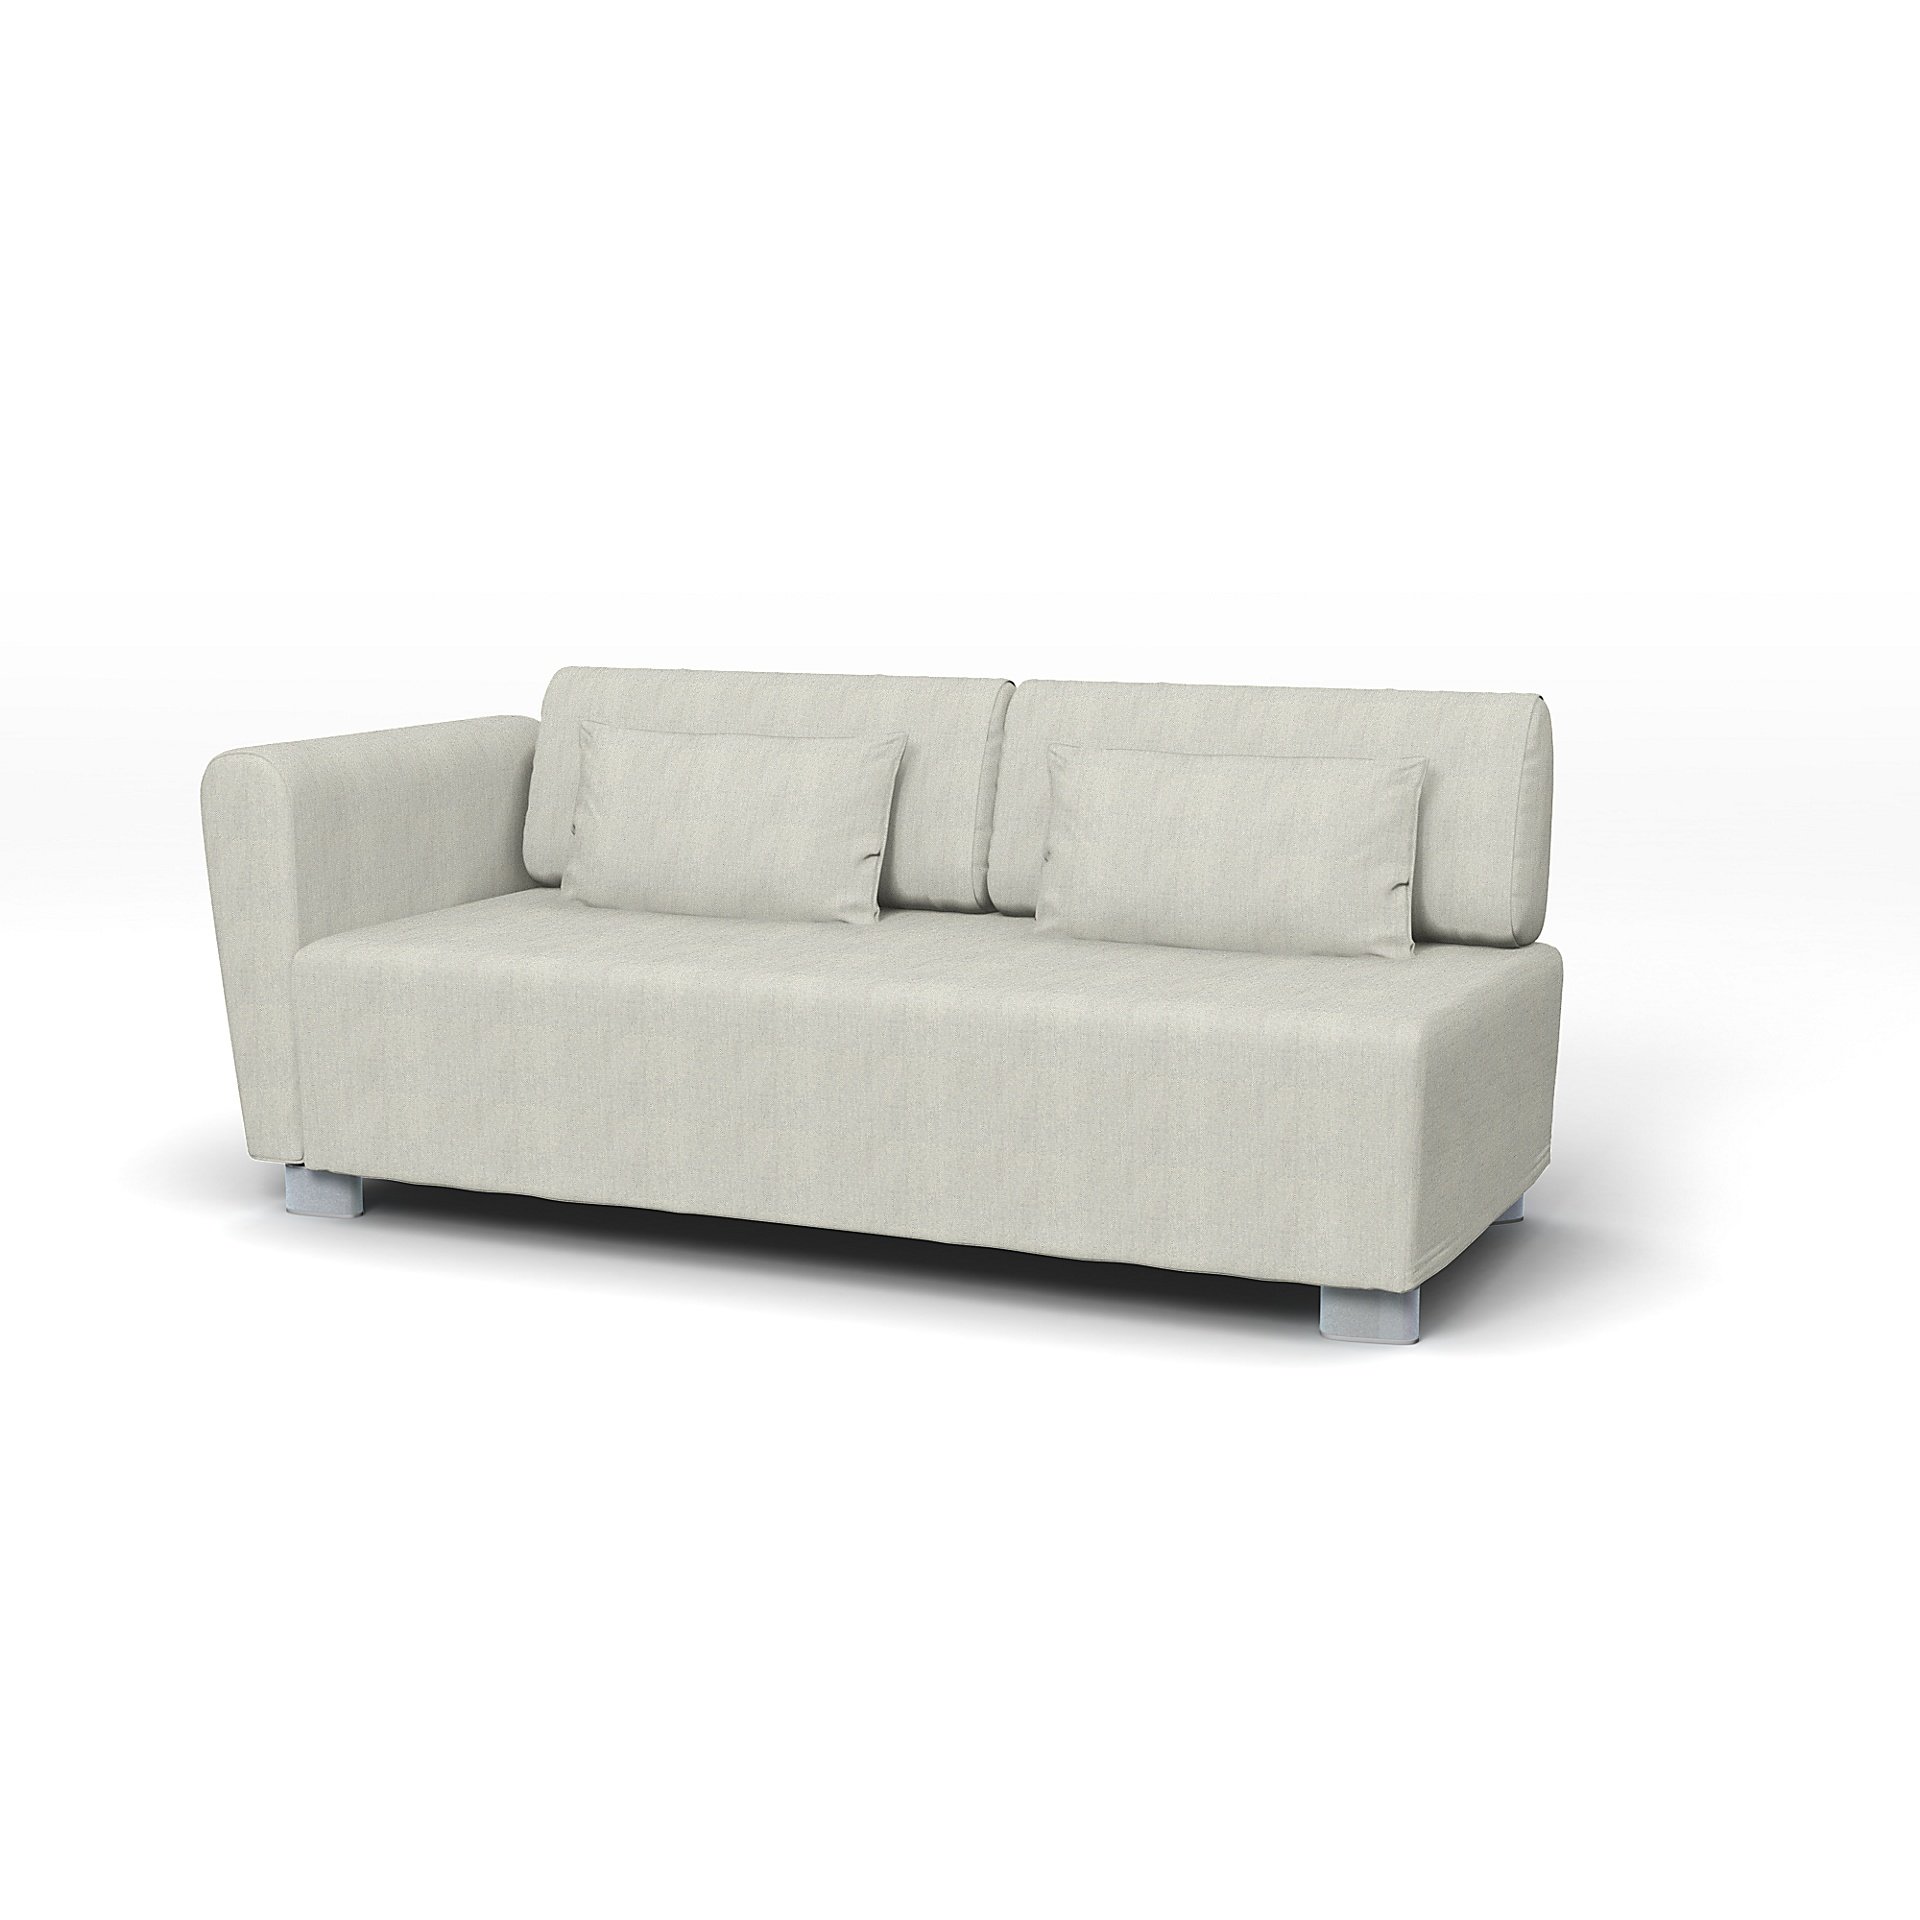 Mysinge 2 Seater Sofa Cover With, Armrest For Couch